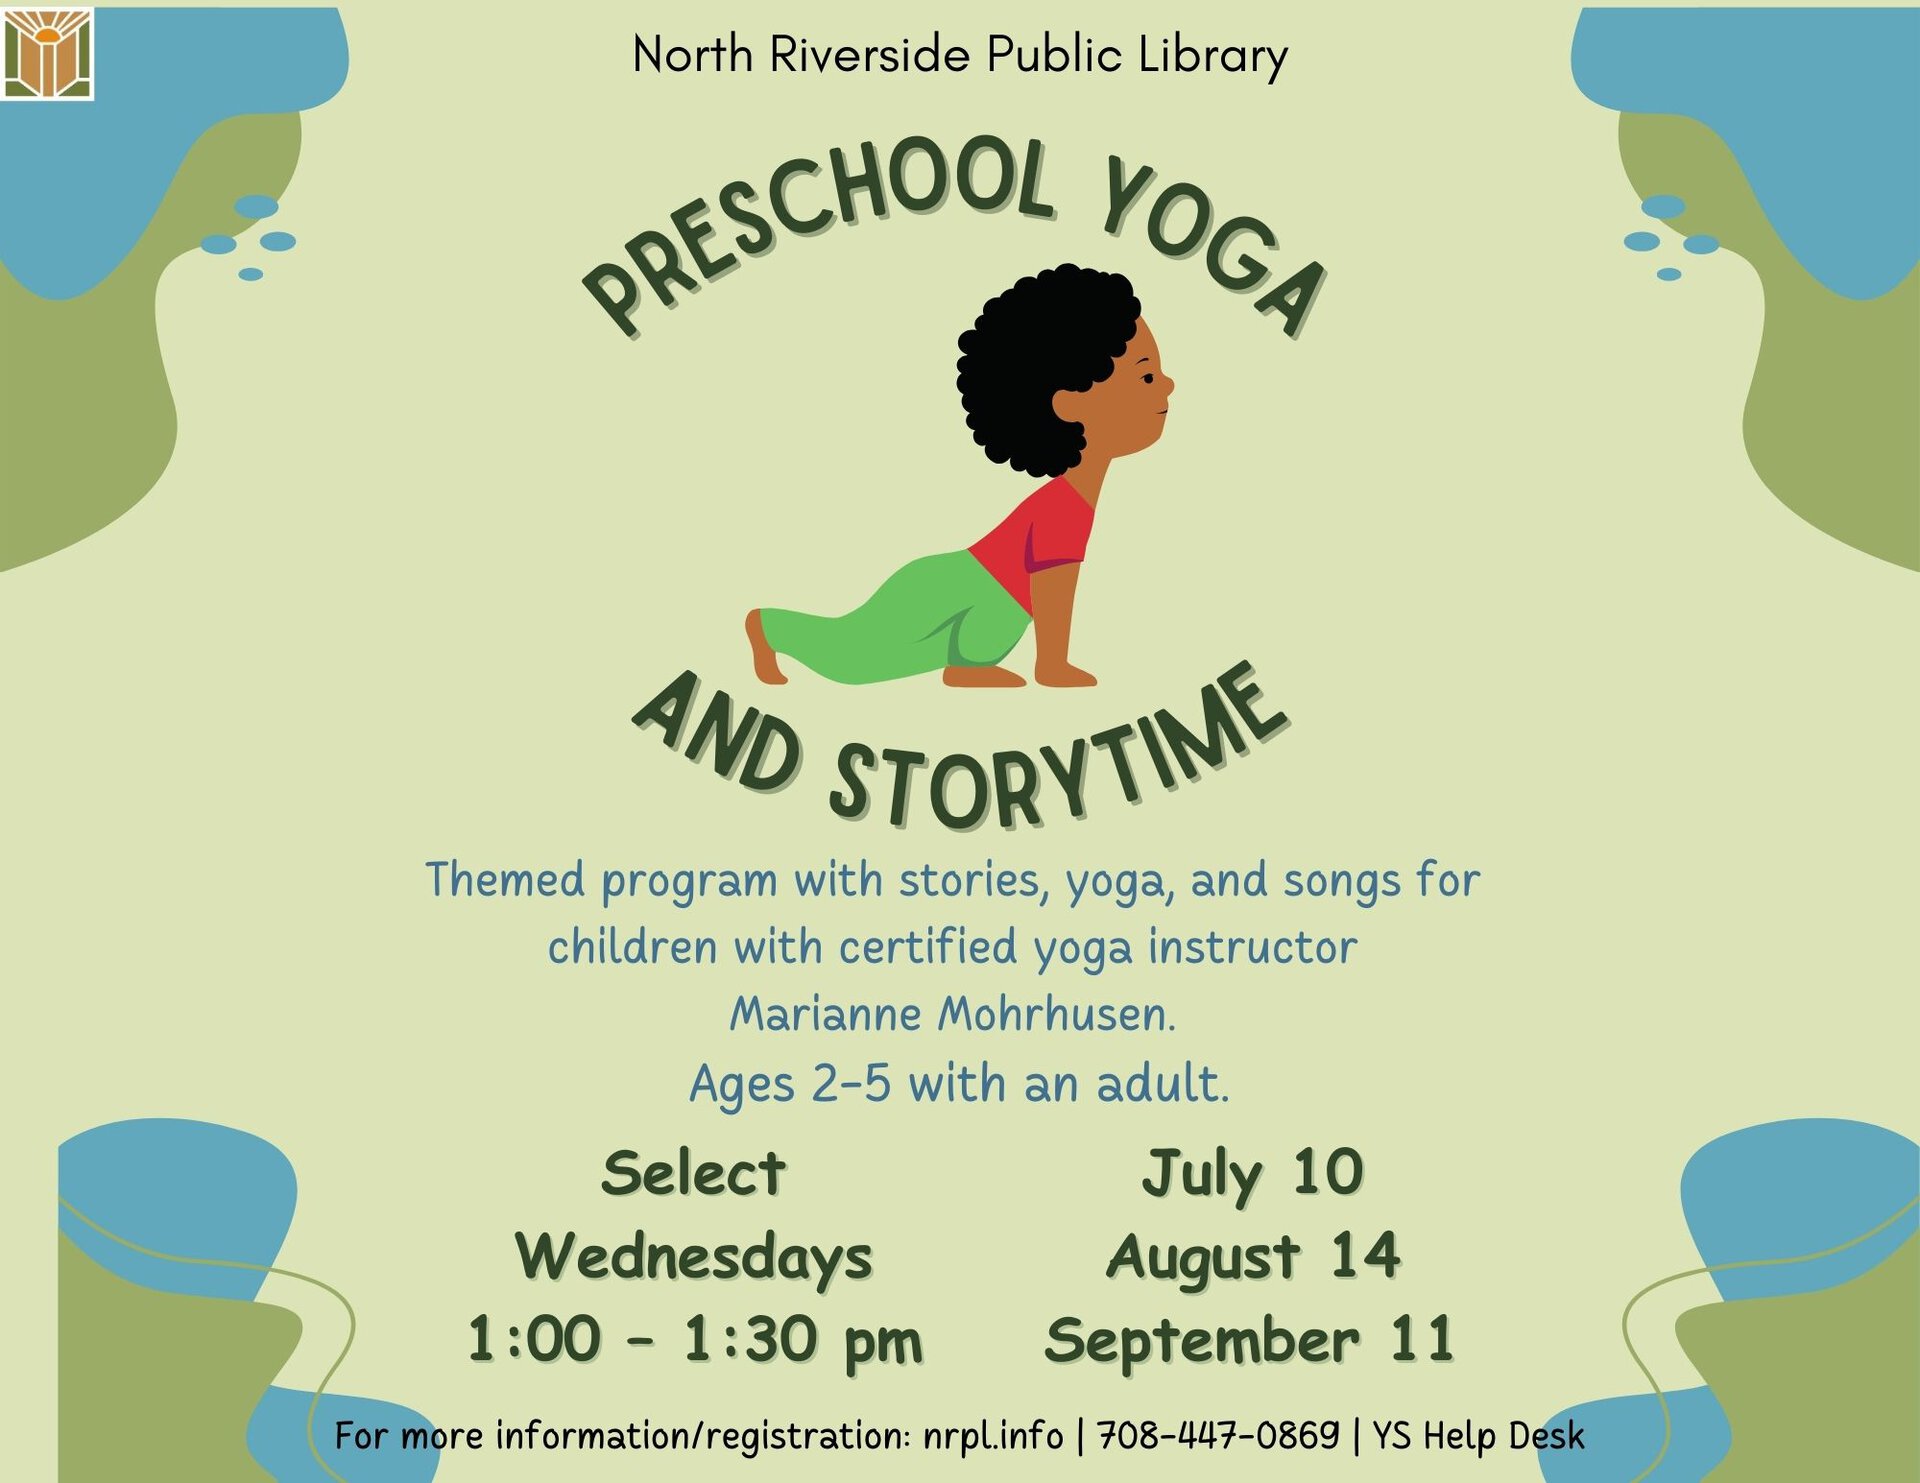 Preschool Yoga & Storytime. Select Wednesdays 1:00 – 1:30 pm. July 10; August 14 & September 11. Themed program with stories, yoga, and songs for children ages 2-5 with an adult.  